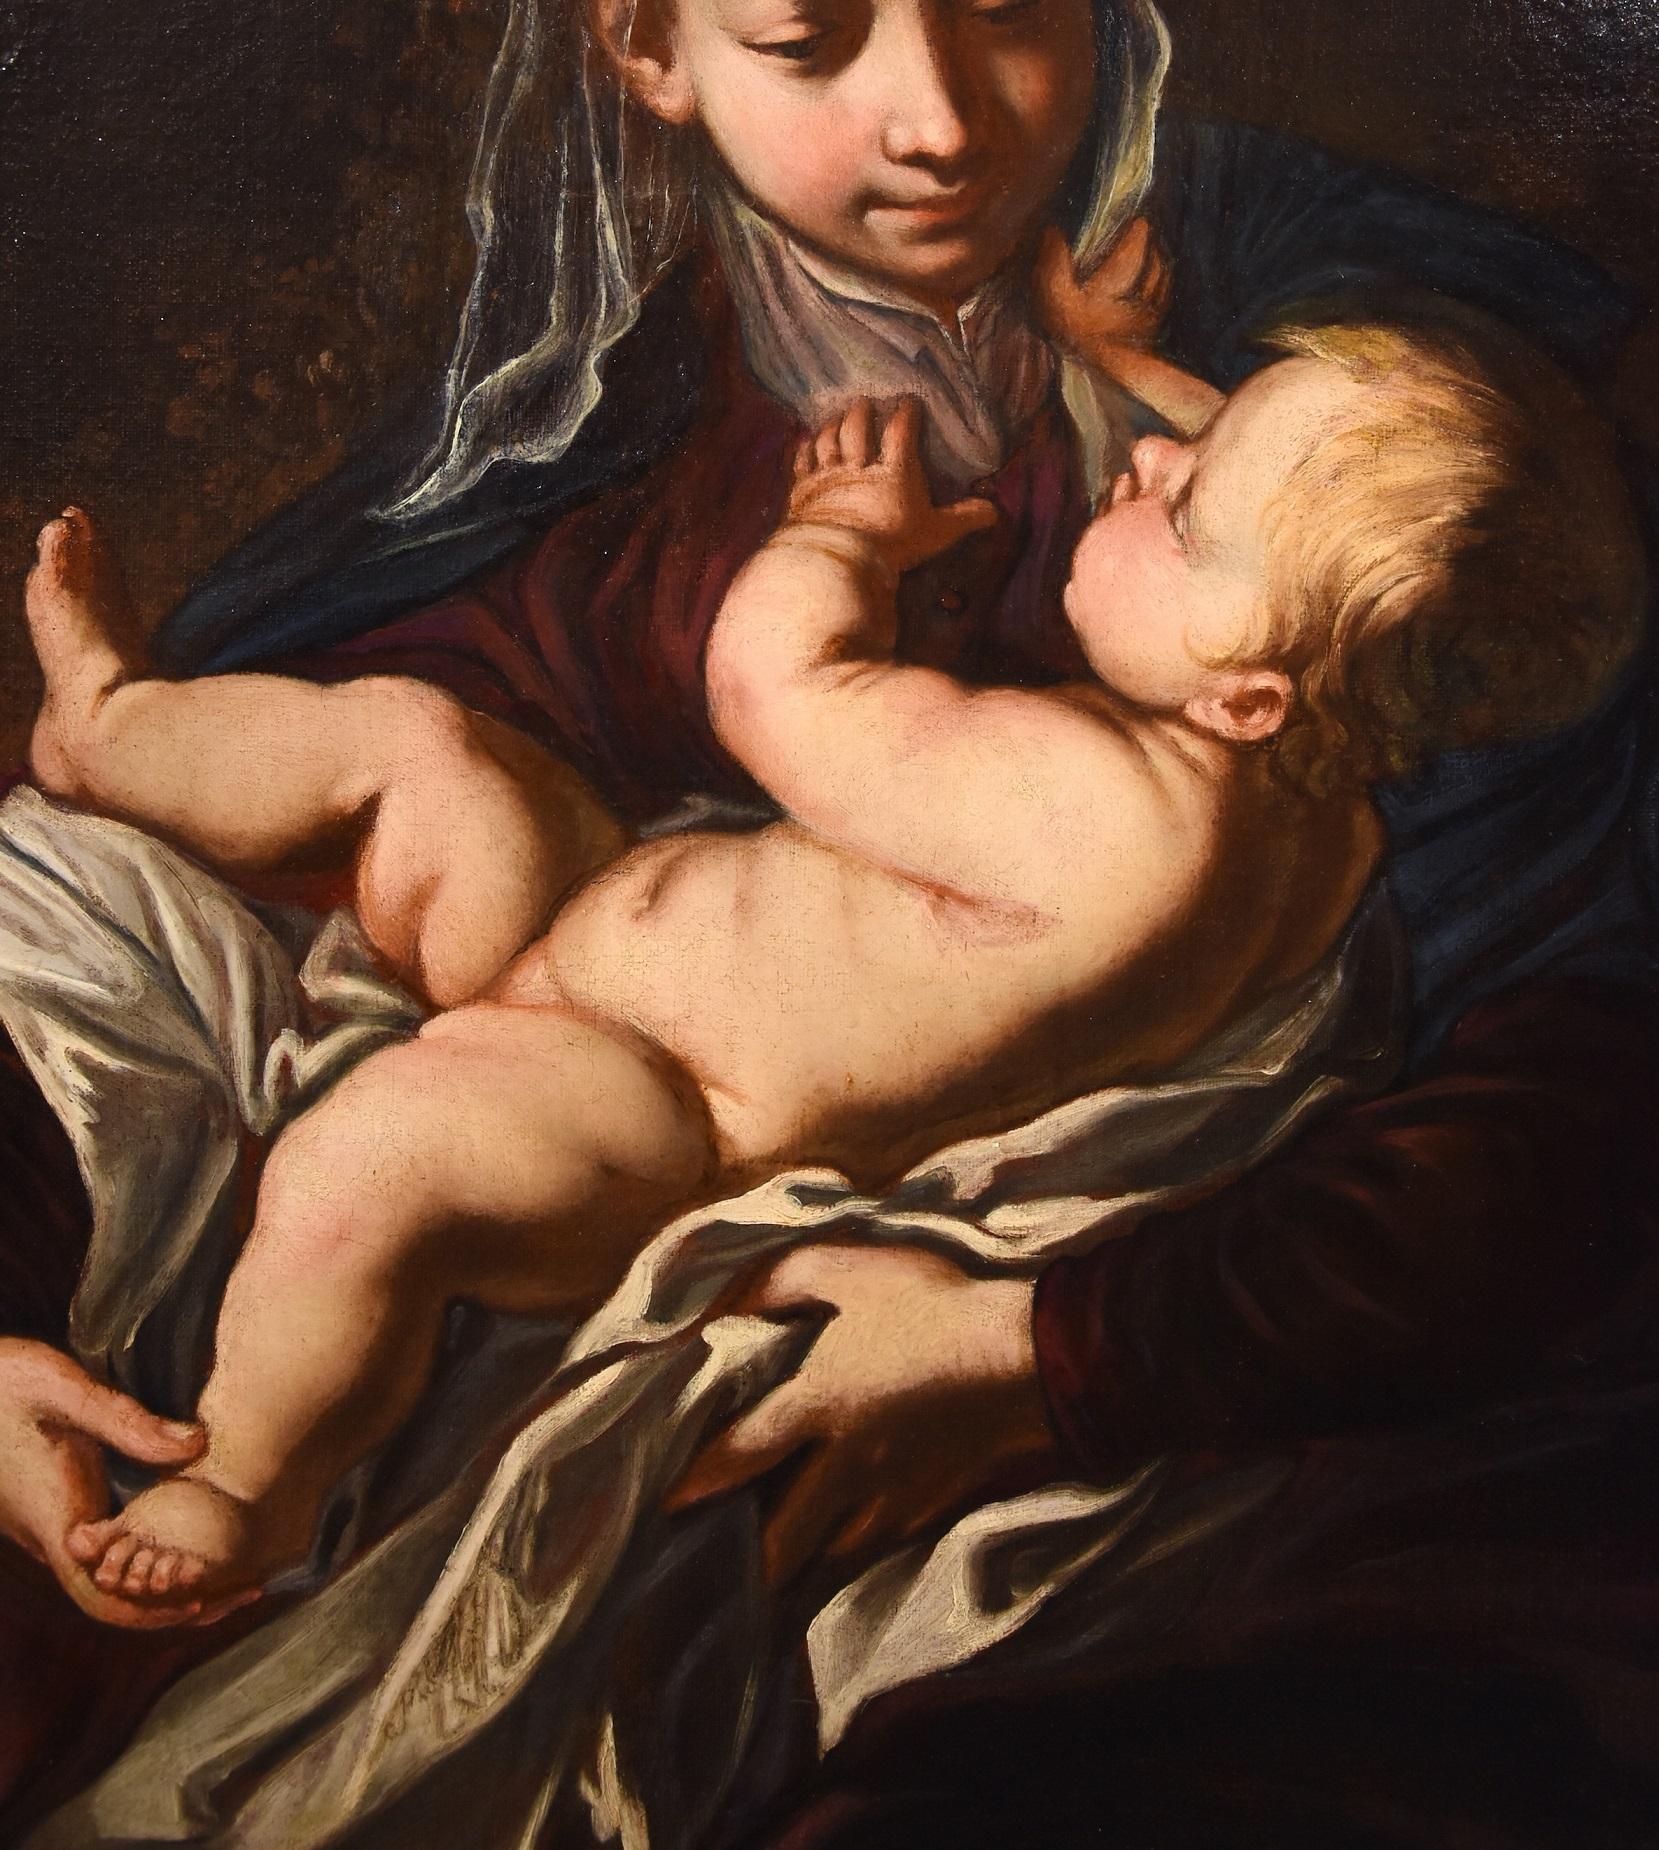 Madonna Child Tiarini Paint Oil on canvas Old master 17th Century Italy Baroque - Old Masters Painting by Alessandro Tiarini (Bologna, 1577 - 1668)